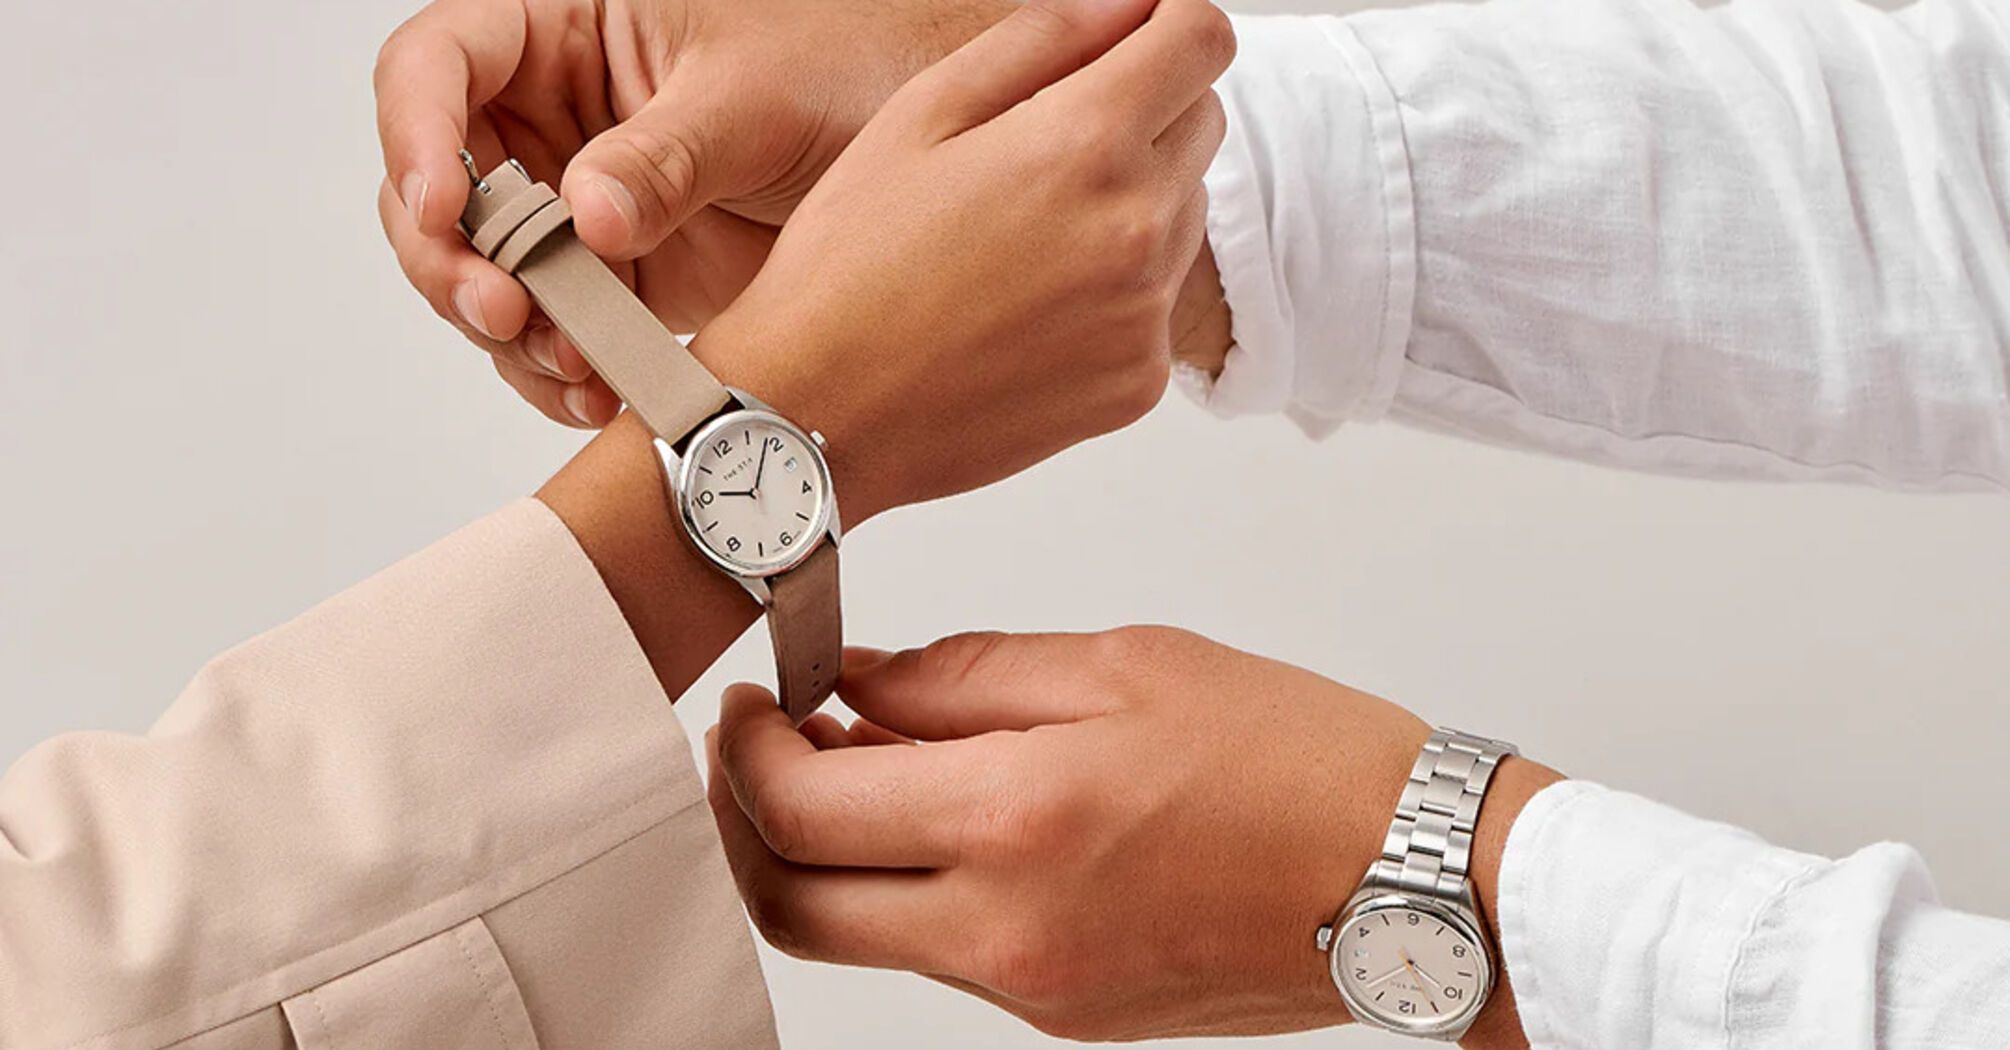 Why giving watches to loved ones can lead to trouble